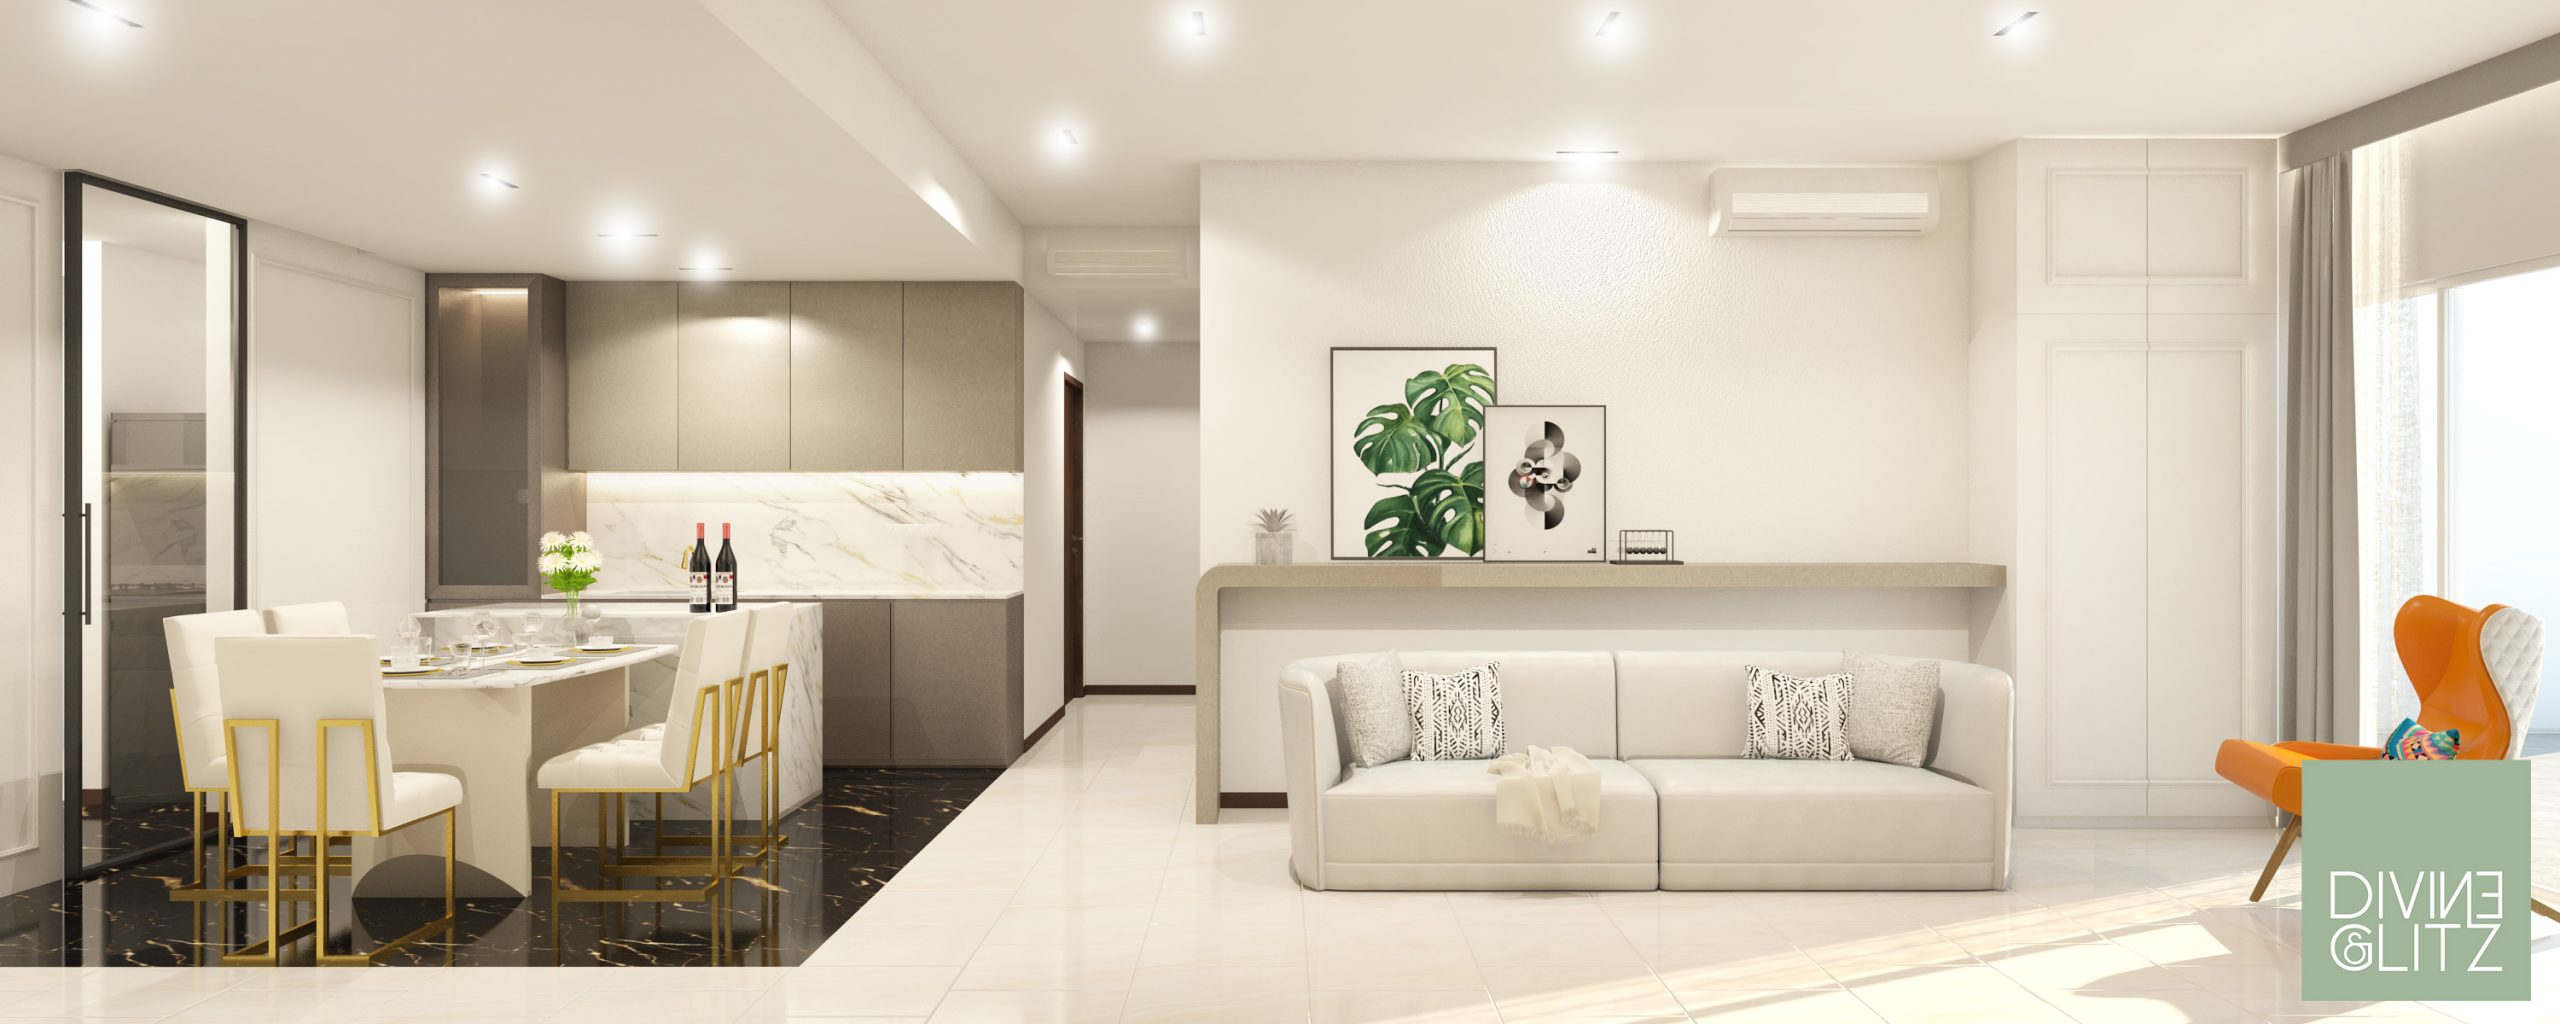 https://www.divineglitz.sg/wp-content/uploads/2022/02/3-17-FEB-3D-PANTRY-FOR-Christine-Edward-s-Residence-3-copy-scaled.jpg